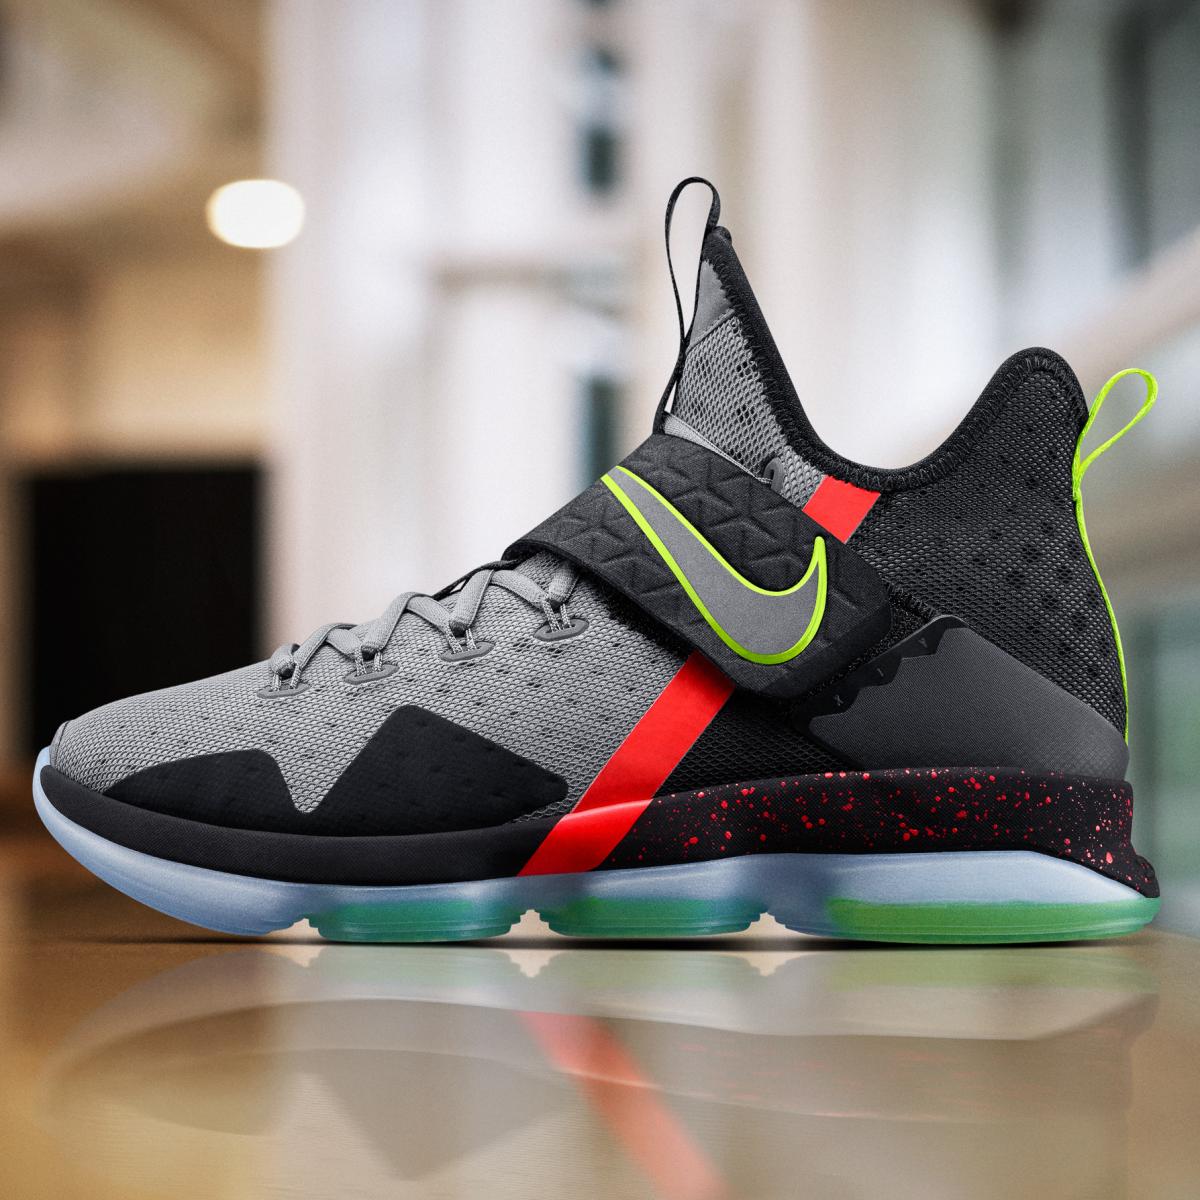 LeBron James, Kyrie Irving, Carmelo Anthony Debut Signature Shoes on Christmas ...1200 x 1200